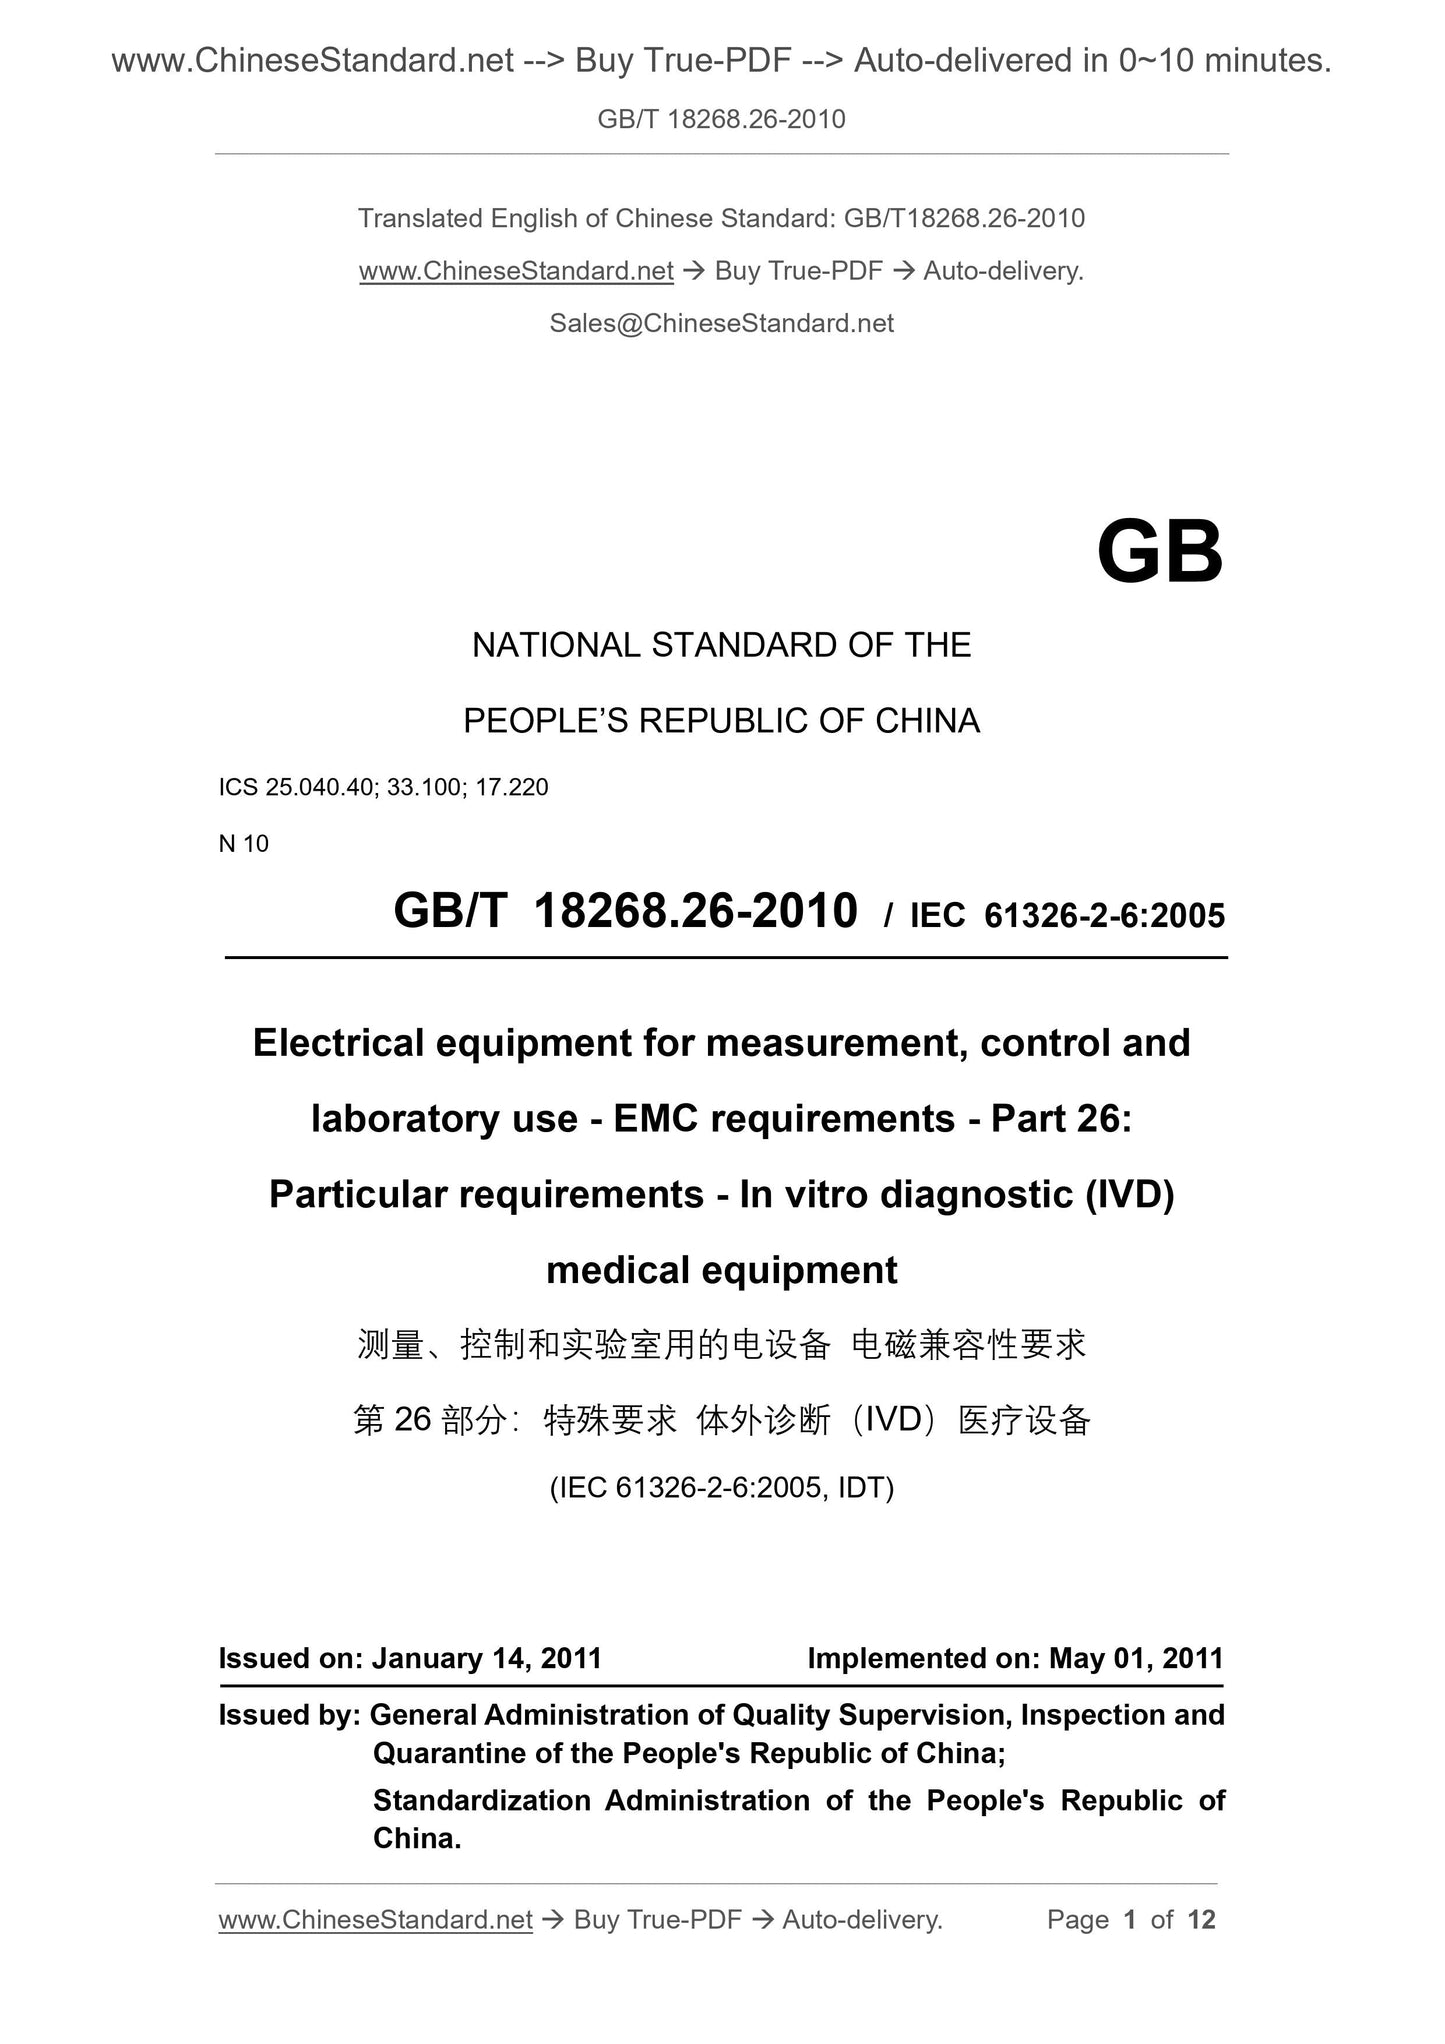 GB/T 18268.26-2010 Page 1